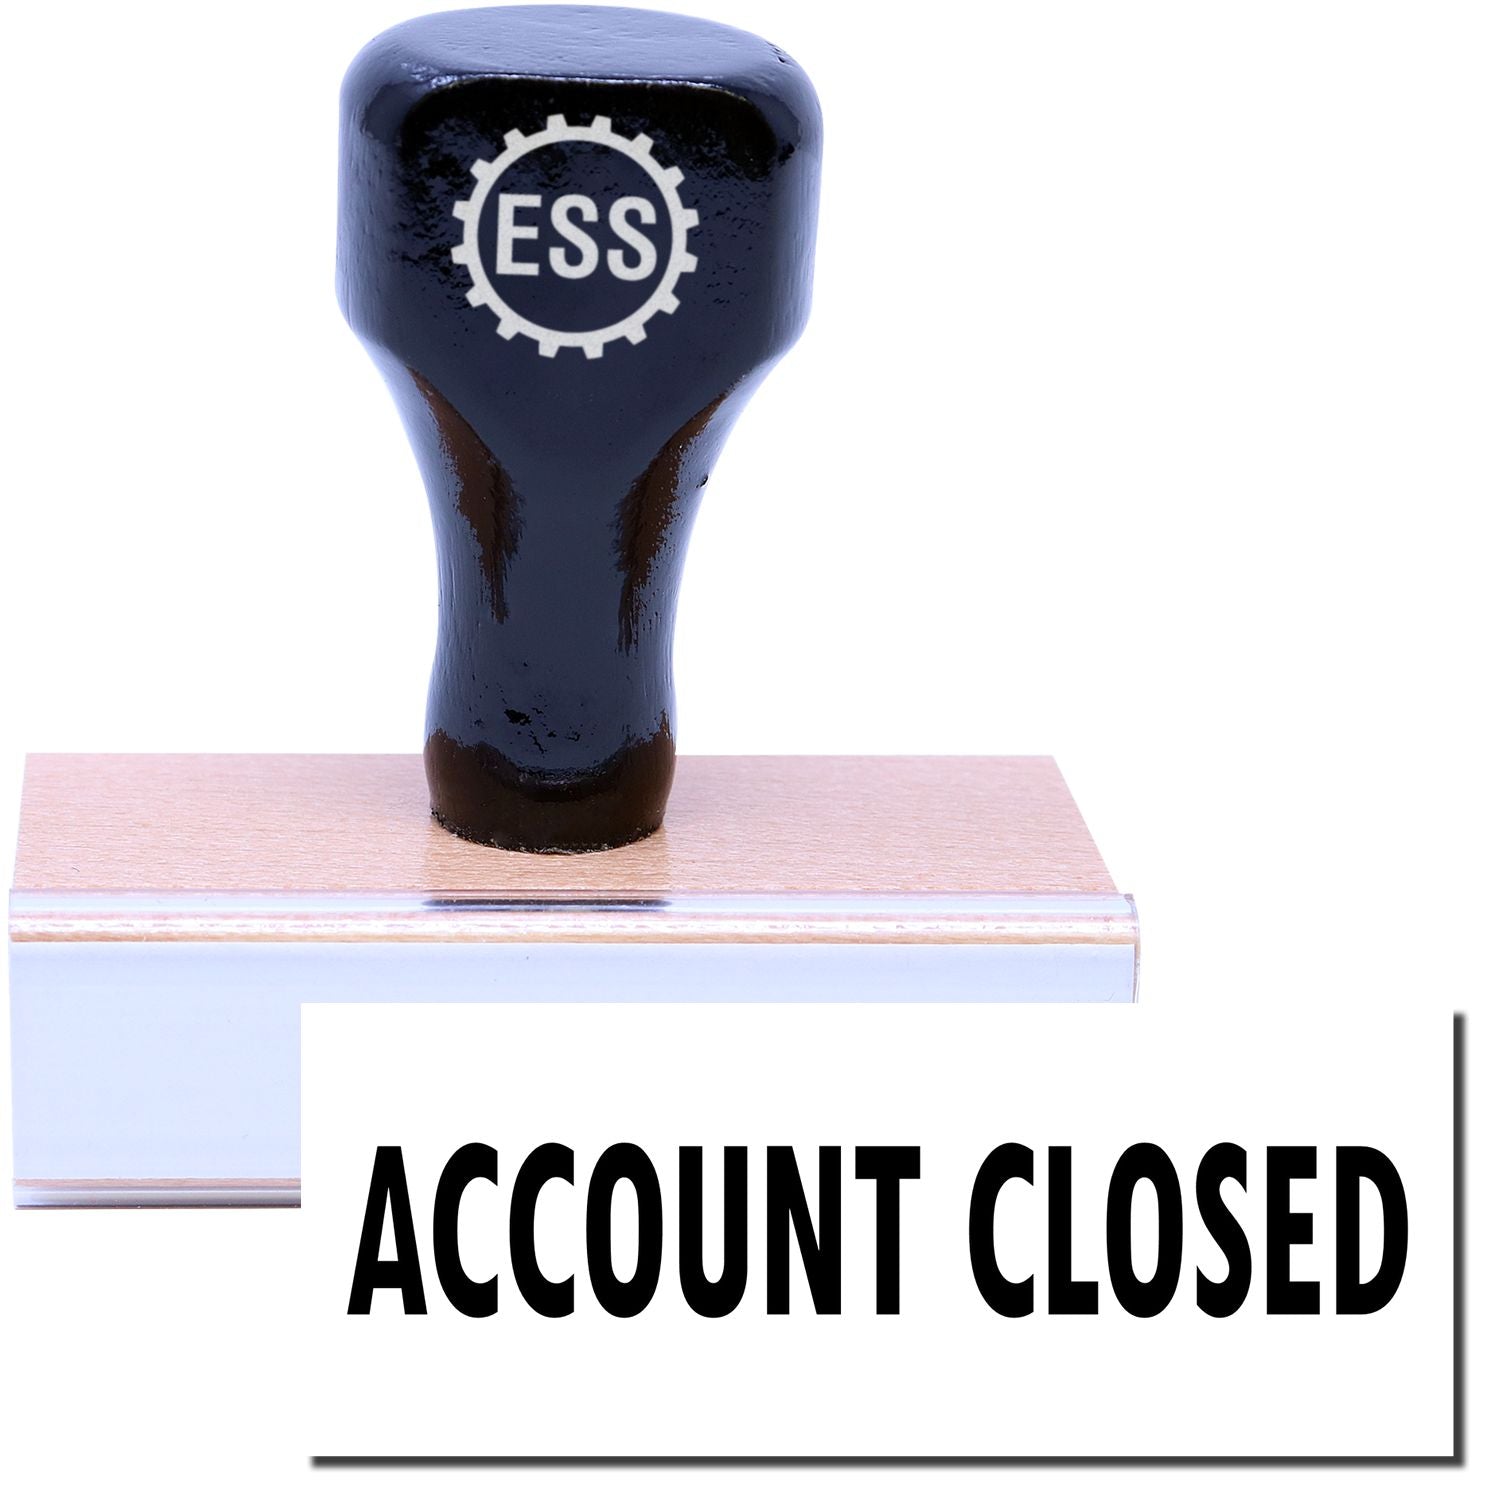 A stock office rubber stamp with a stamped image showing how the text "ACCOUNT CLOSED"  is displayed after stamping.